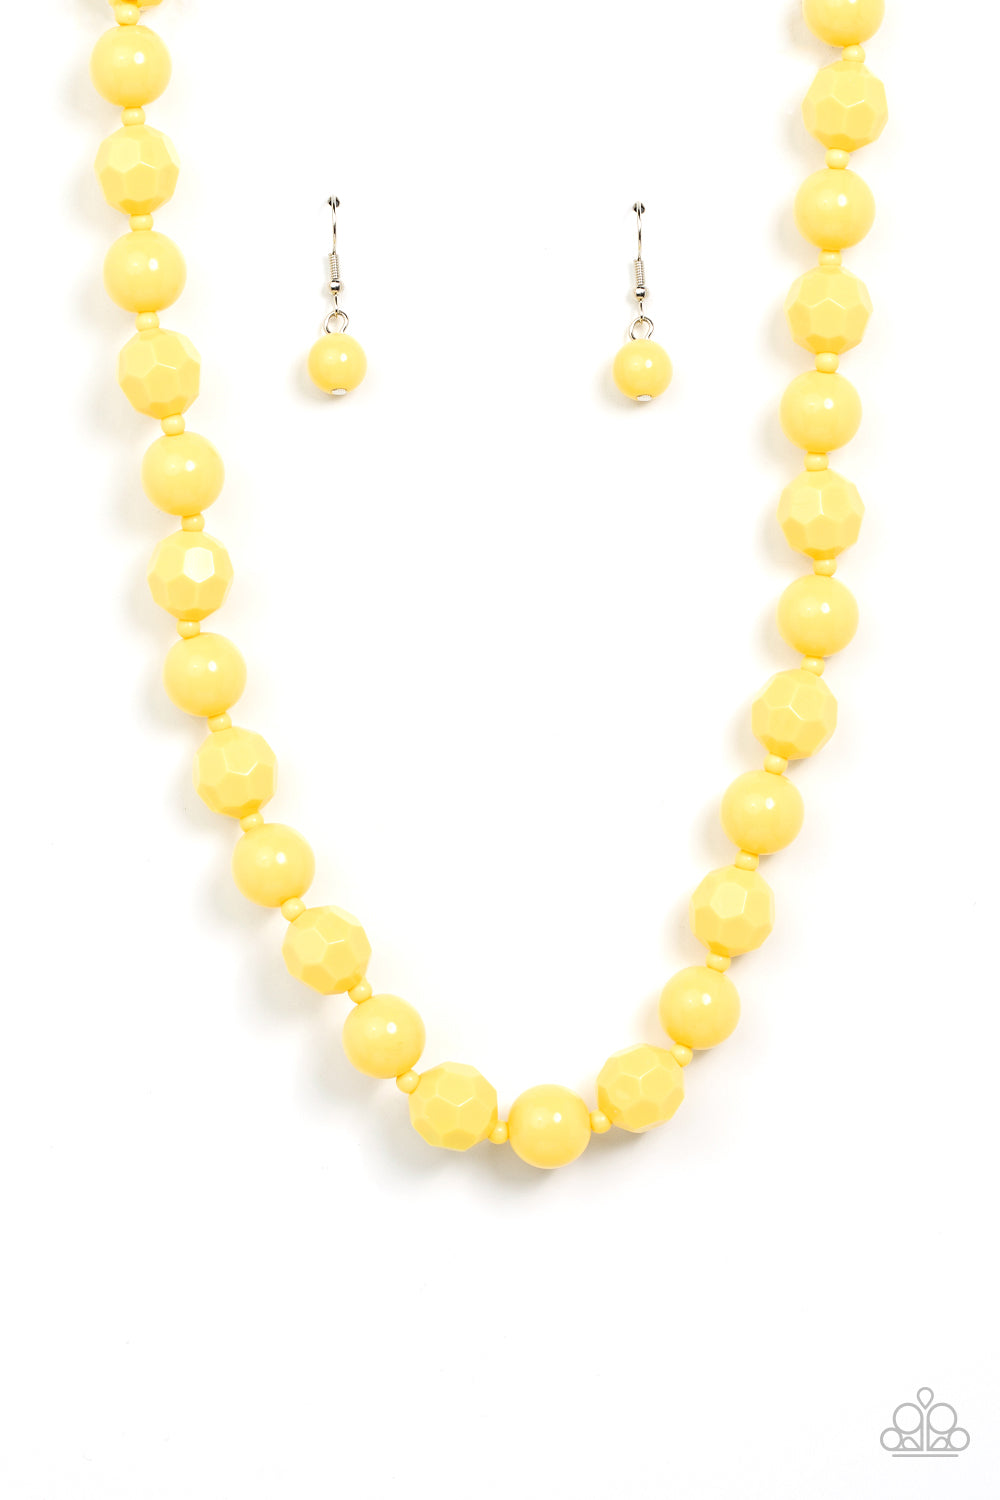 PAPARAZZI SUMMER SOLO - YELLOW NECKLACE – Bee's Bling Bash